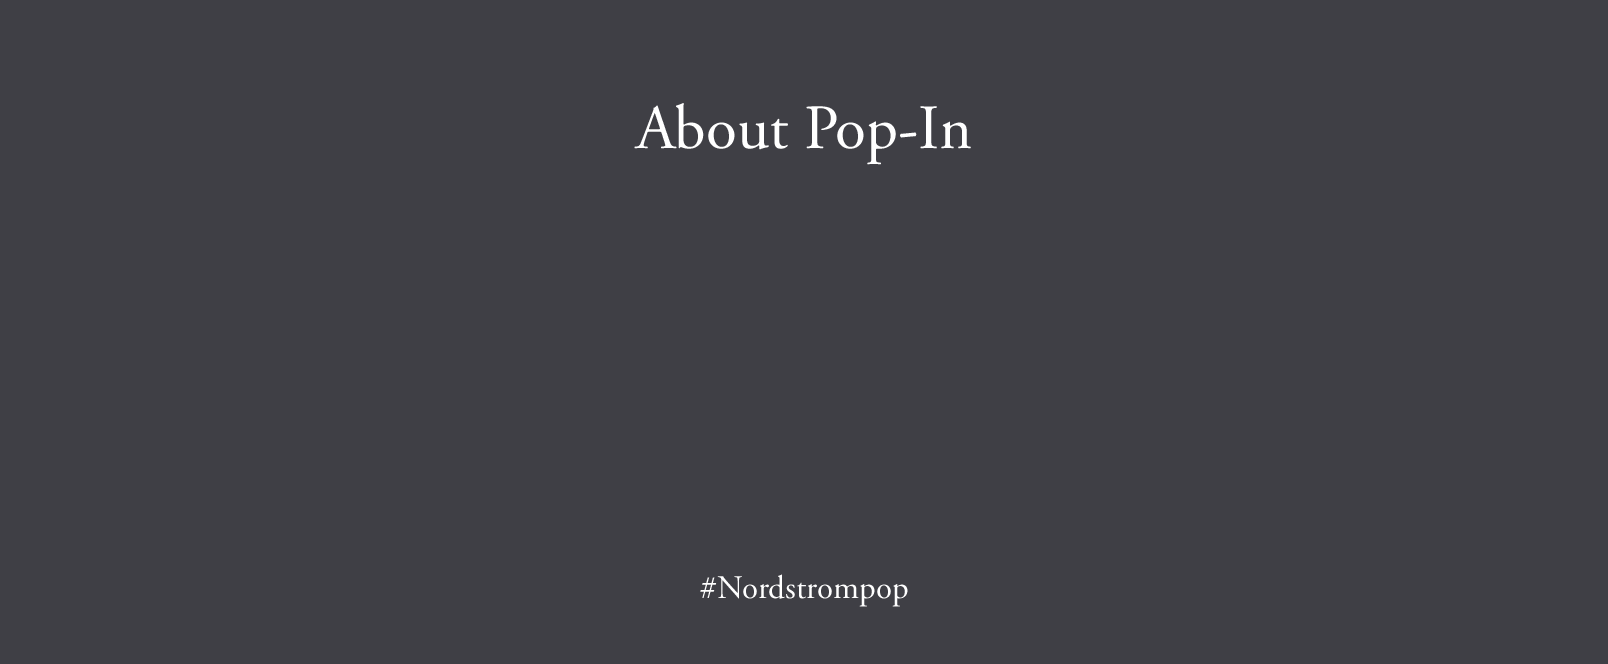 Pop-In@Nordstrom is an ongoing series of limited-time pop-up shops curated by Olivia Kim. Each shop presents new and exclusive products, designers and content built around a different theme or collaboration. Past Pop-In themes include poolside glamour, K-beauty, Paris, Earth Day, pets, '90s raves and road trips, to name a few—plus partnerships with HAY, goop, Aesop, Eileen Fisher, Nike, The North Face, Poketo and more. Find the Pop-In at selected stores and online at Nordstrom.com/POP—and come back to visit us every month or so for a totally new Pop-In@Nordstrom.